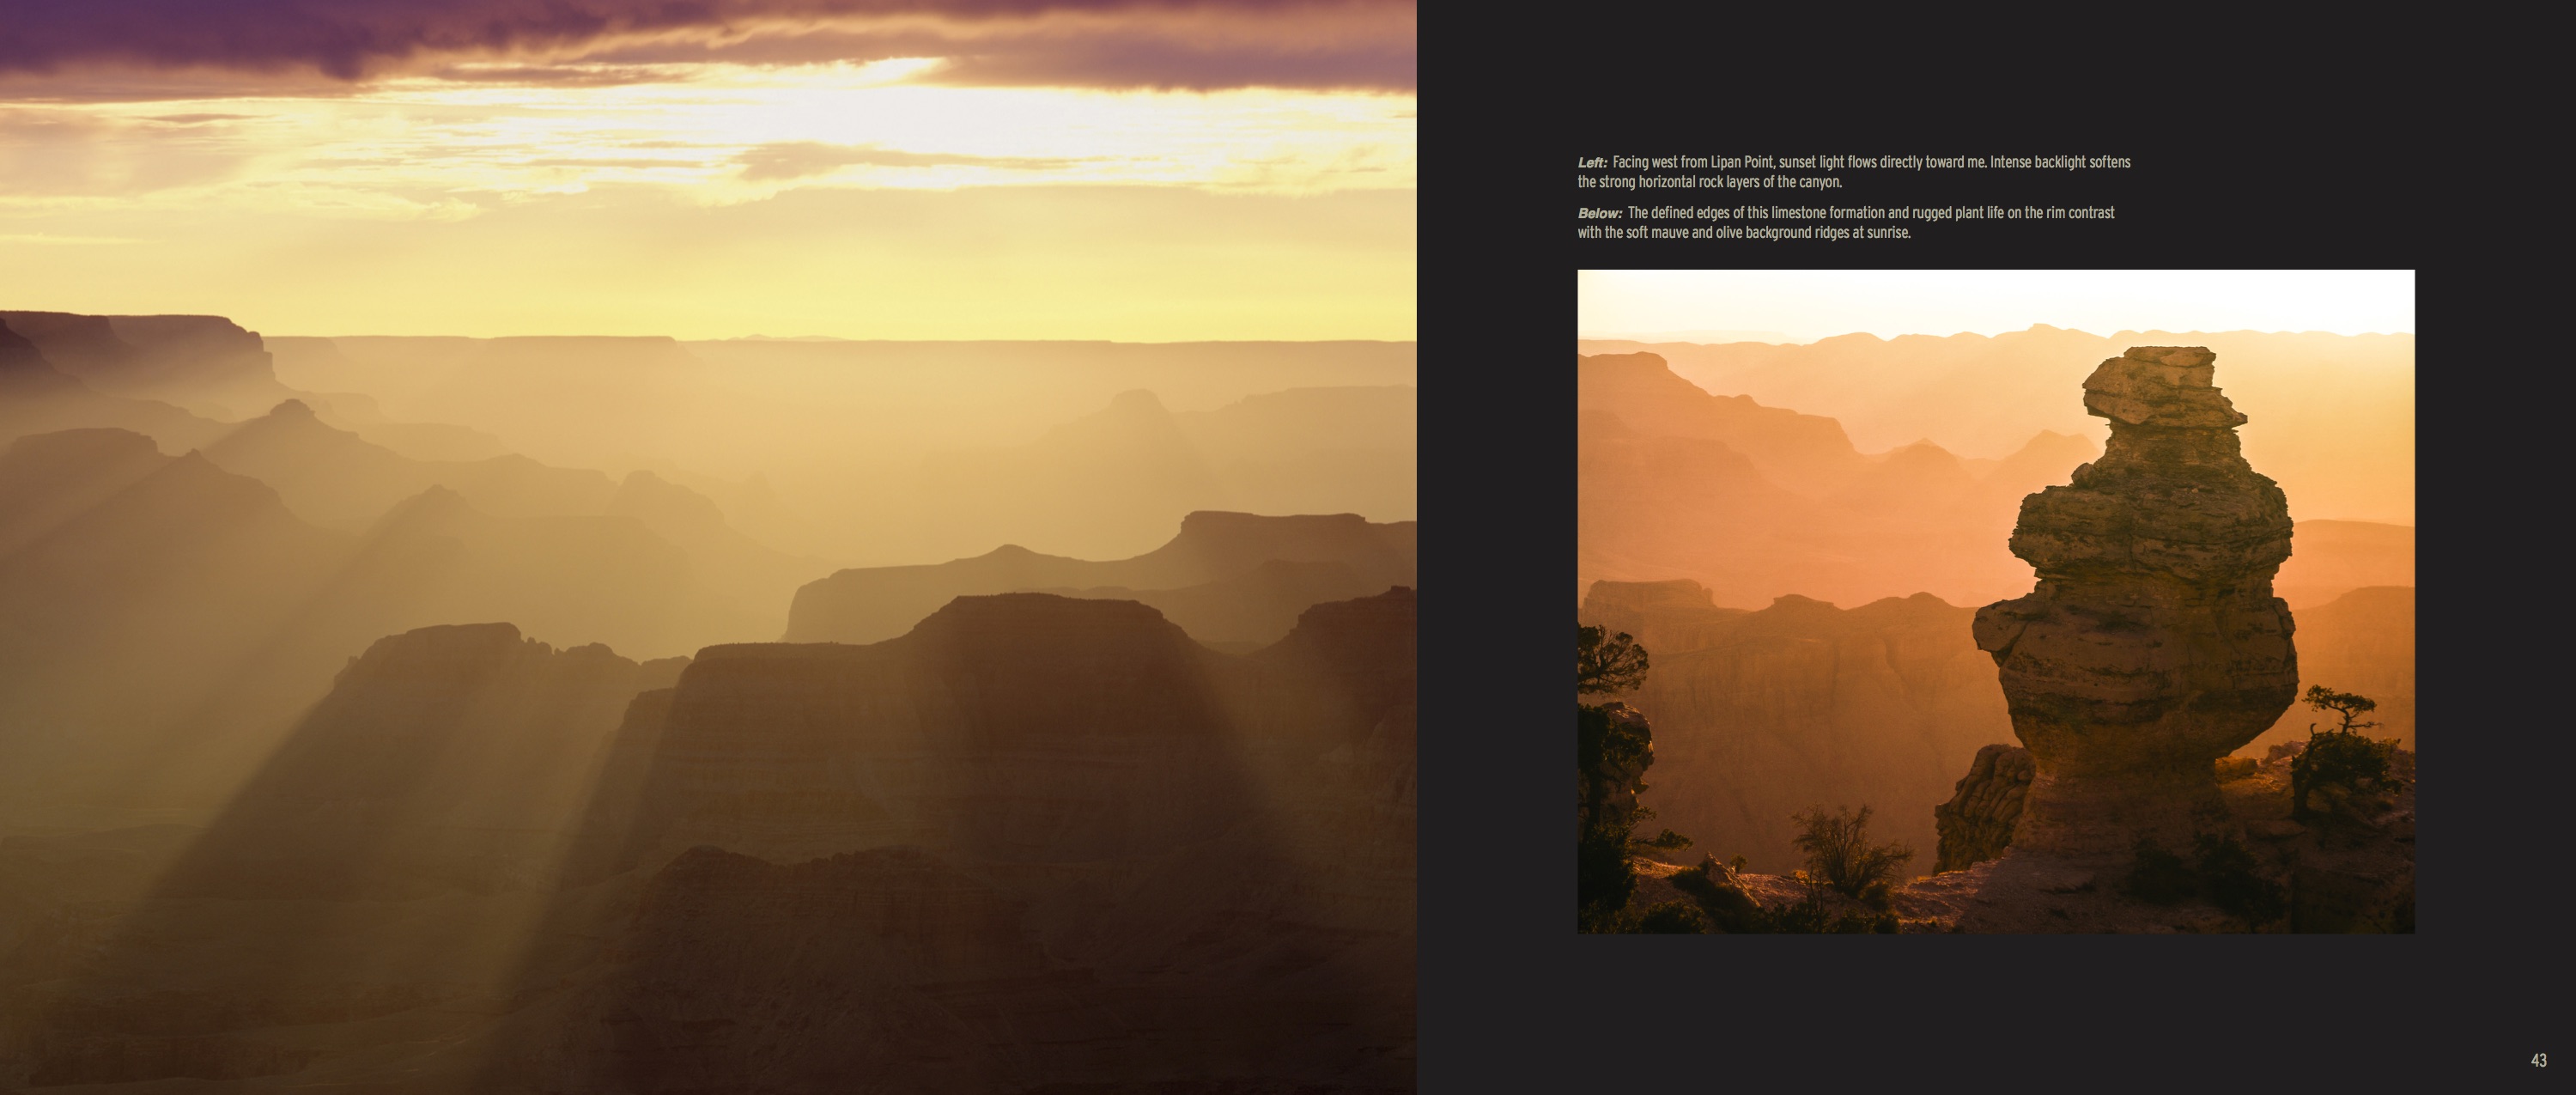 Balanced Rock p. 43 from David Muench's Timeless Moments: Grand Canyon National Park